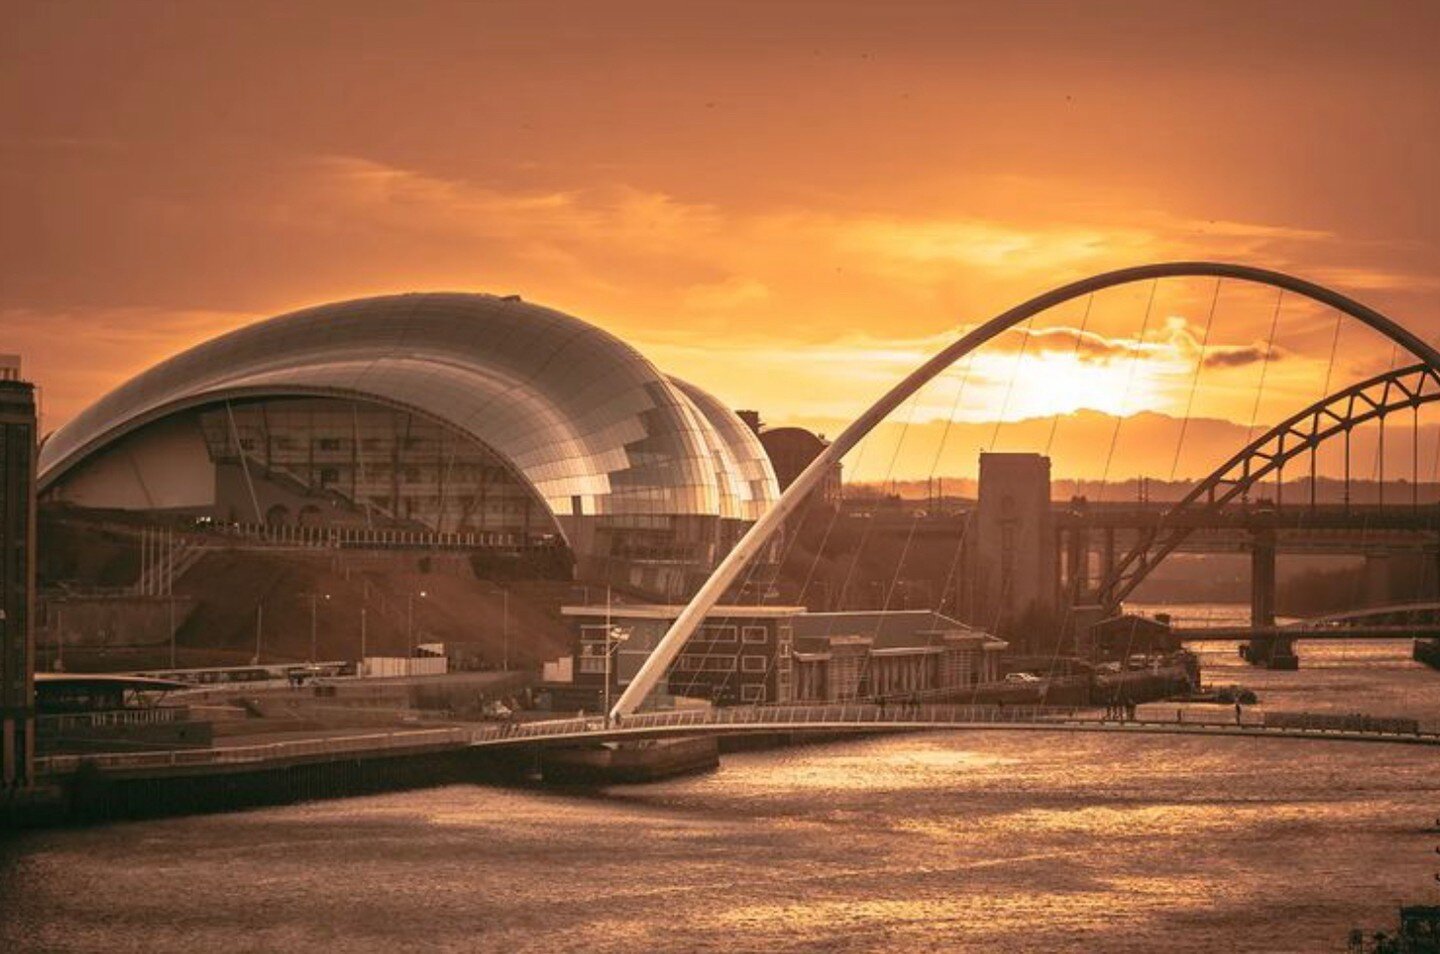 A gorgeous sunset over our beautiful toon.
Where is your favourite place to capture the sun in the region?

📸 - mje_photography_ne

#thetoon #newcastlefoodies #newcastle #newcastleupontyne #newcastlensw #newcastleunderlyme #newcastlebeach #newcastle